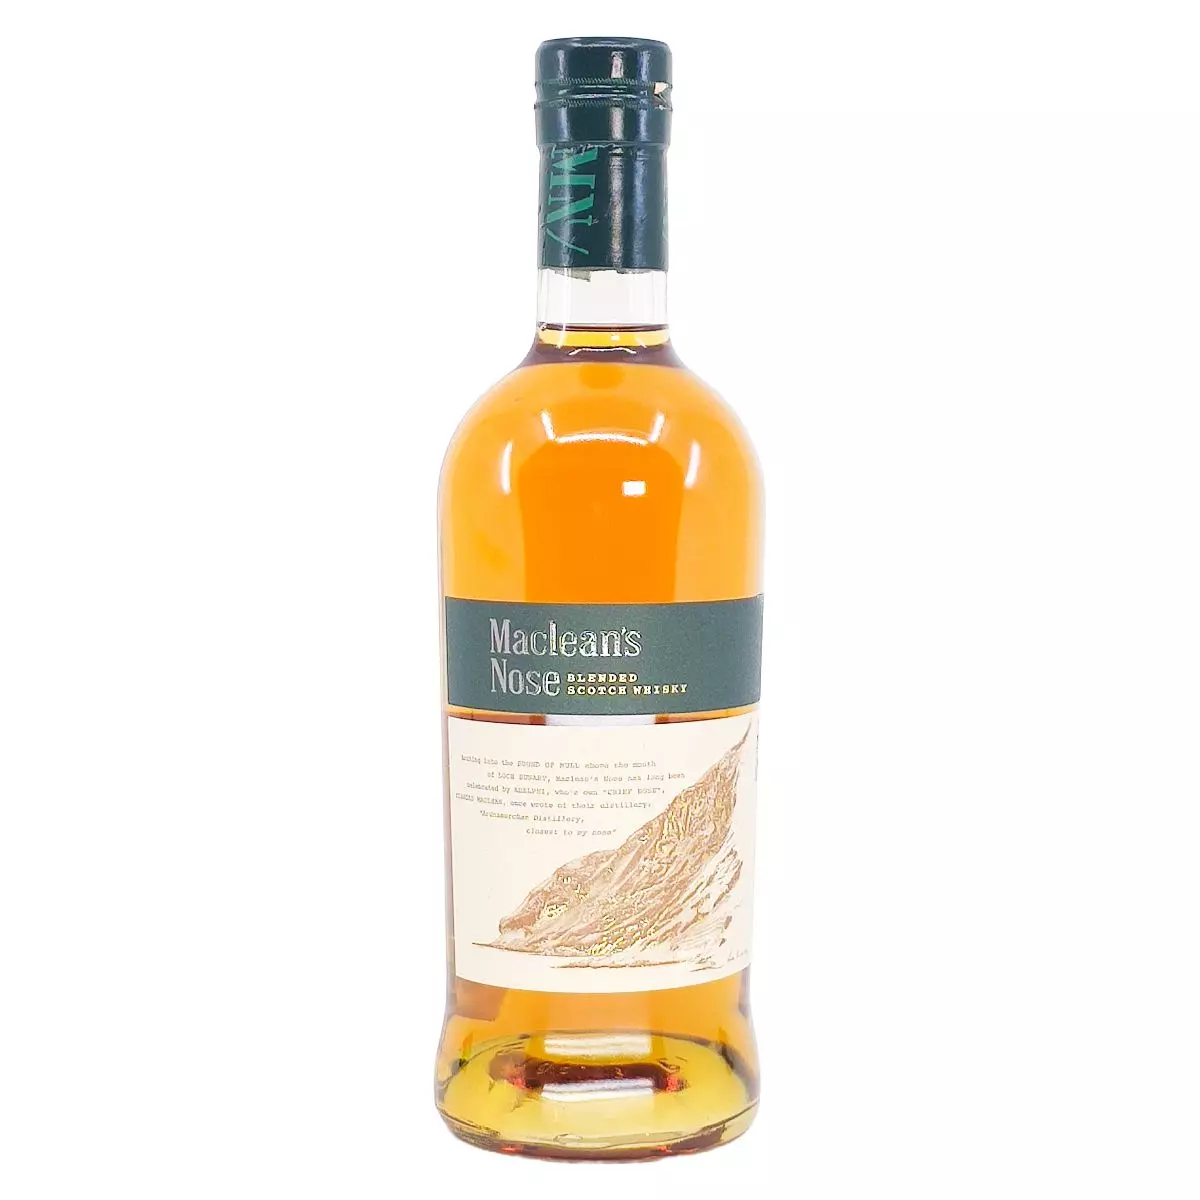 Maclean's Nose Blend Scotch Whisky (0,7L / 46%)